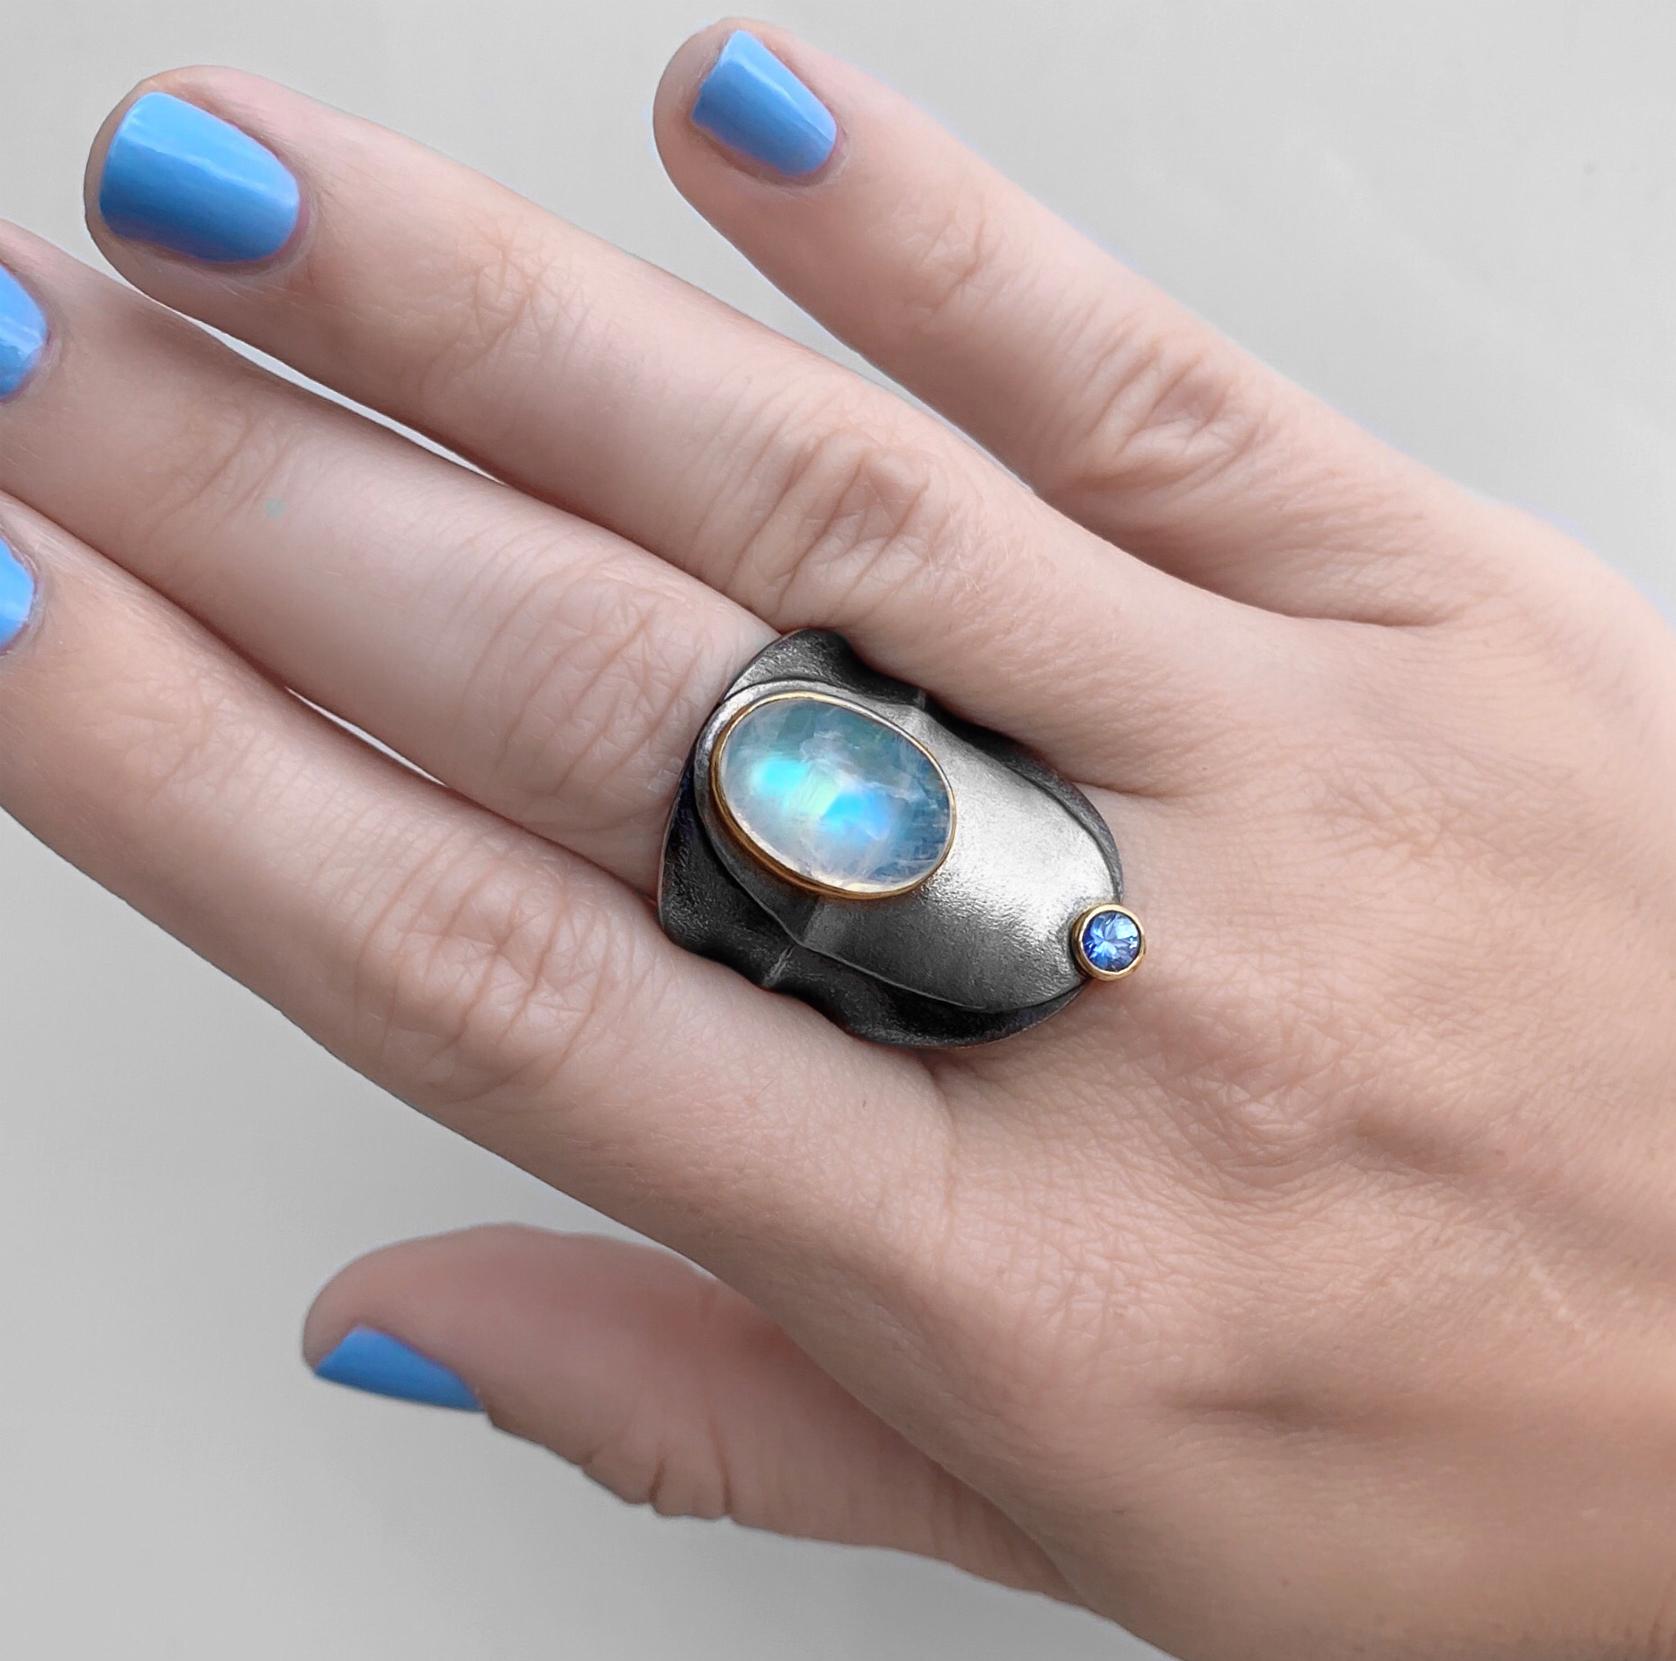 One of a Kind Double Stone Ring hand-fabricated in Germany by master jewellery maker Peter Schmid of Atelier Zobel, featuring a spectacular 6.12 carat cabochon-cut rainbow moonstone and a 0.24 carat natural lilac sapphire, each set in a 22k yellow